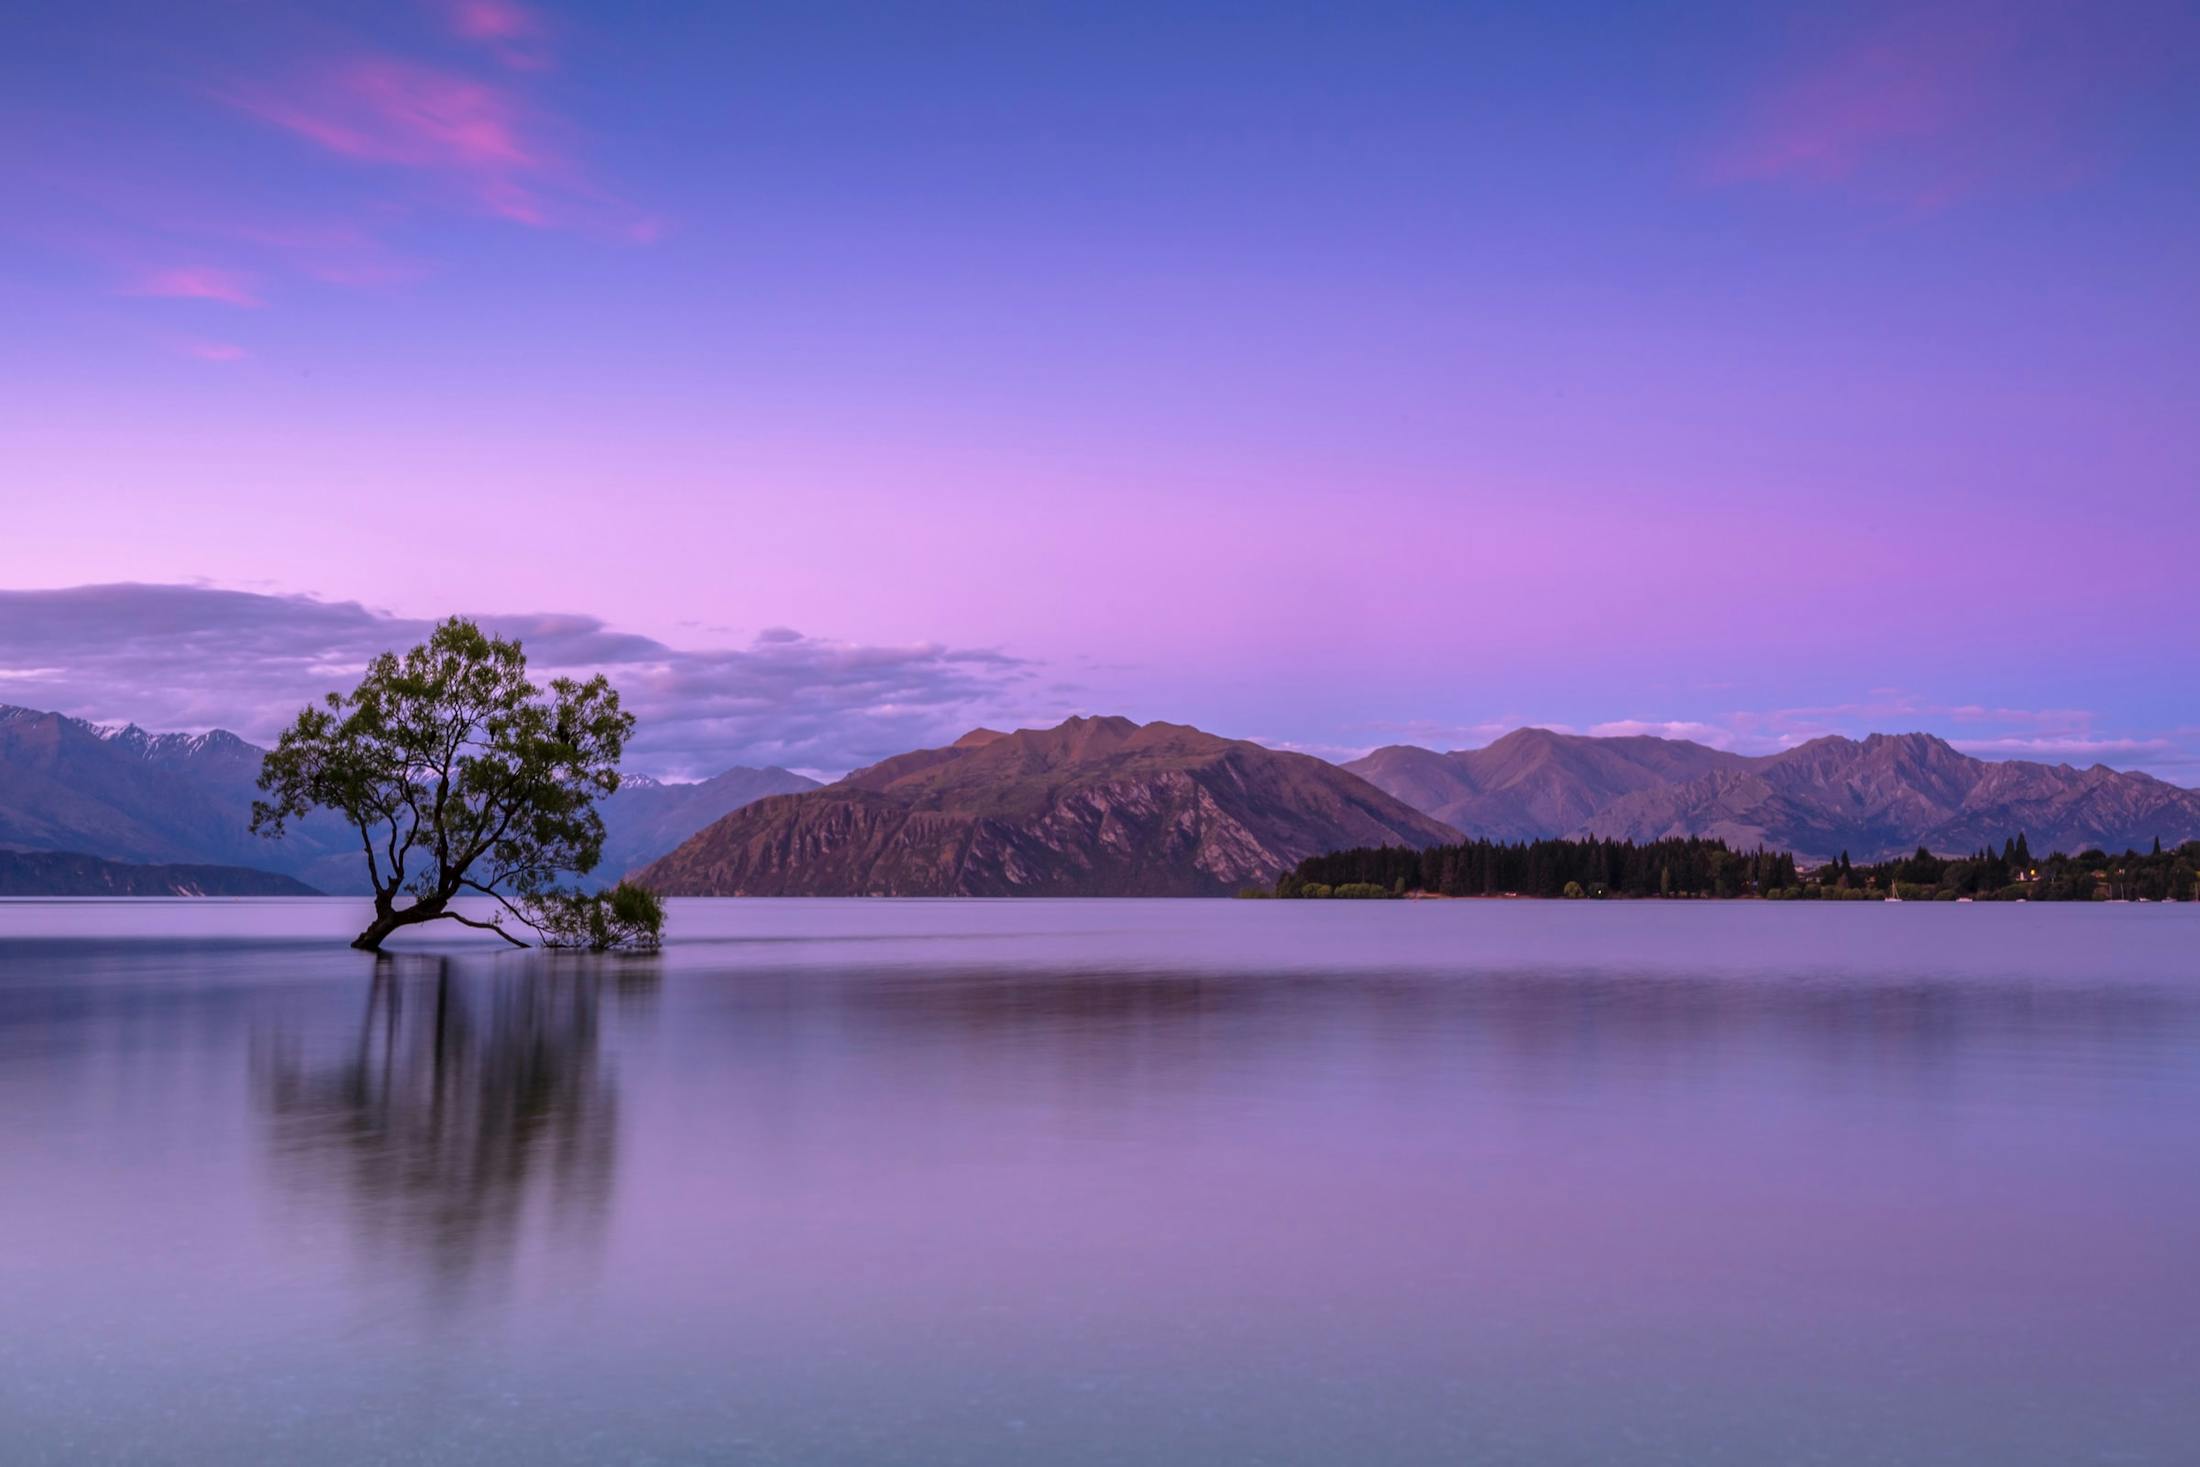 Purple hue over water and mountains